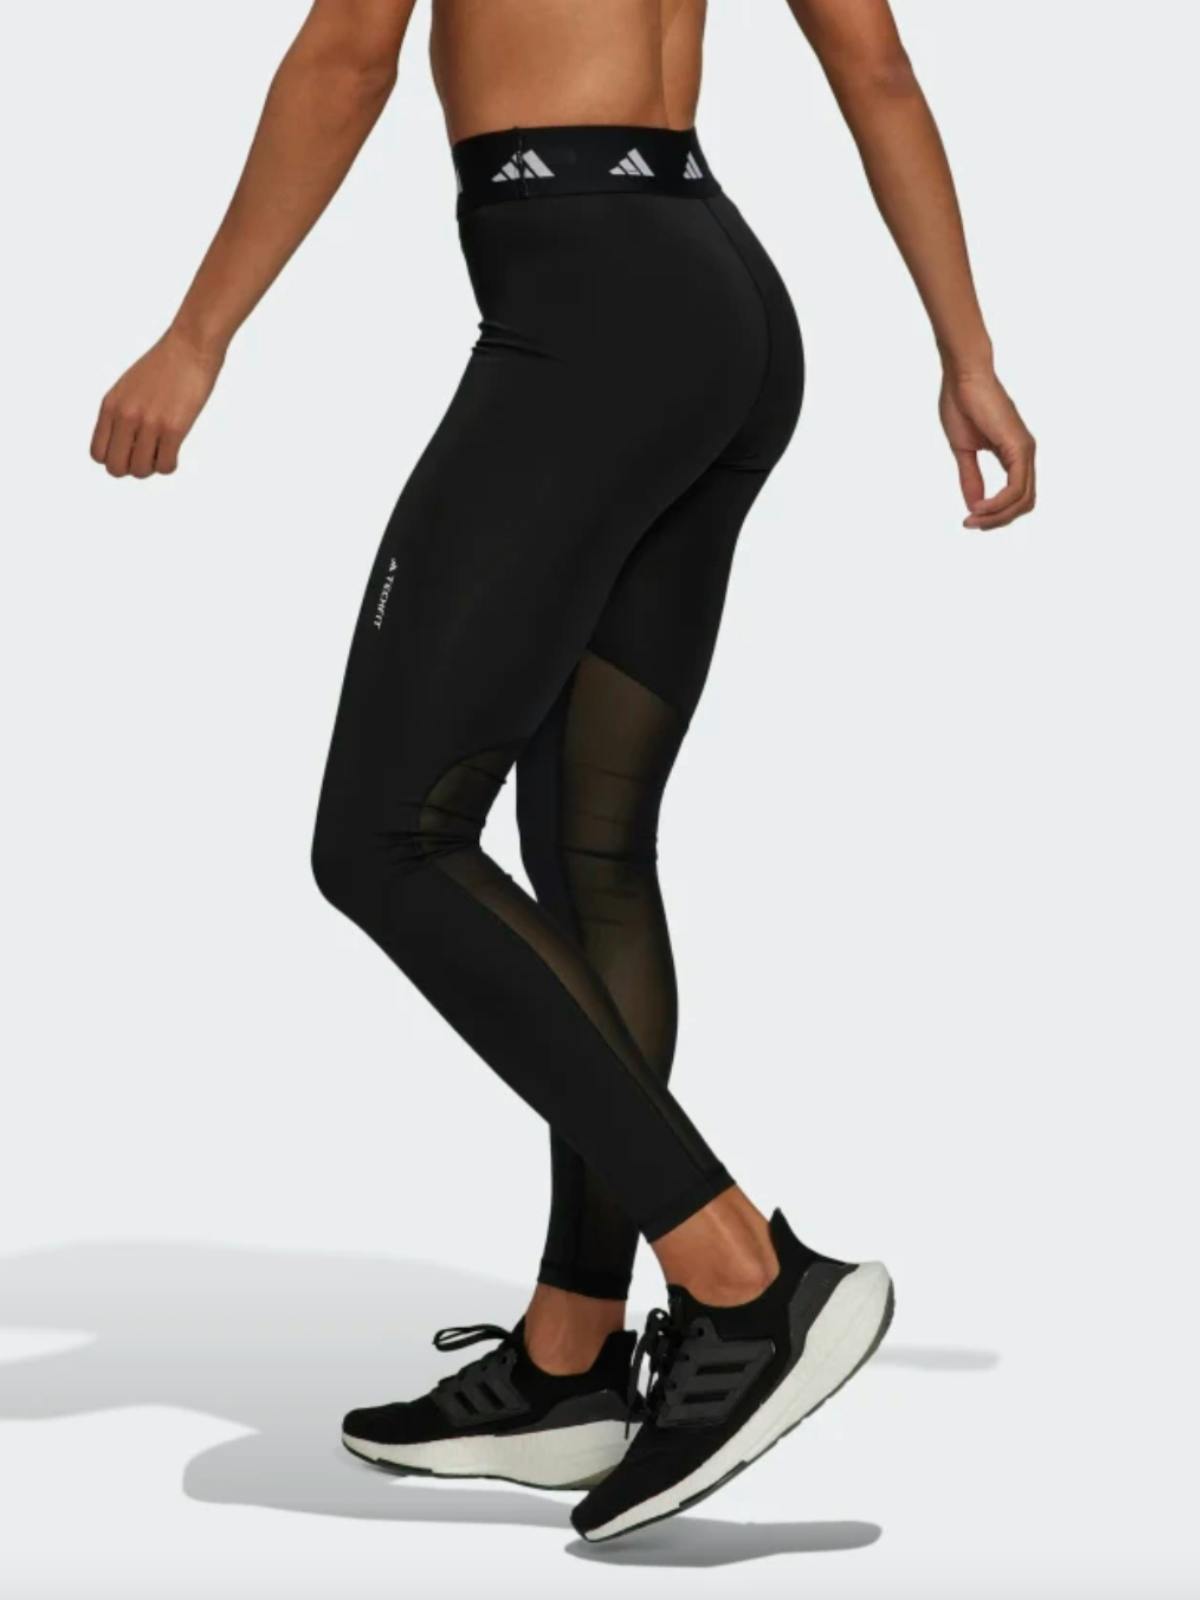 I love this look!!! Sending love and goodness to all~cheryl #affiliate |  High waist sports leggings, Womens printed leggings, Sports leggings